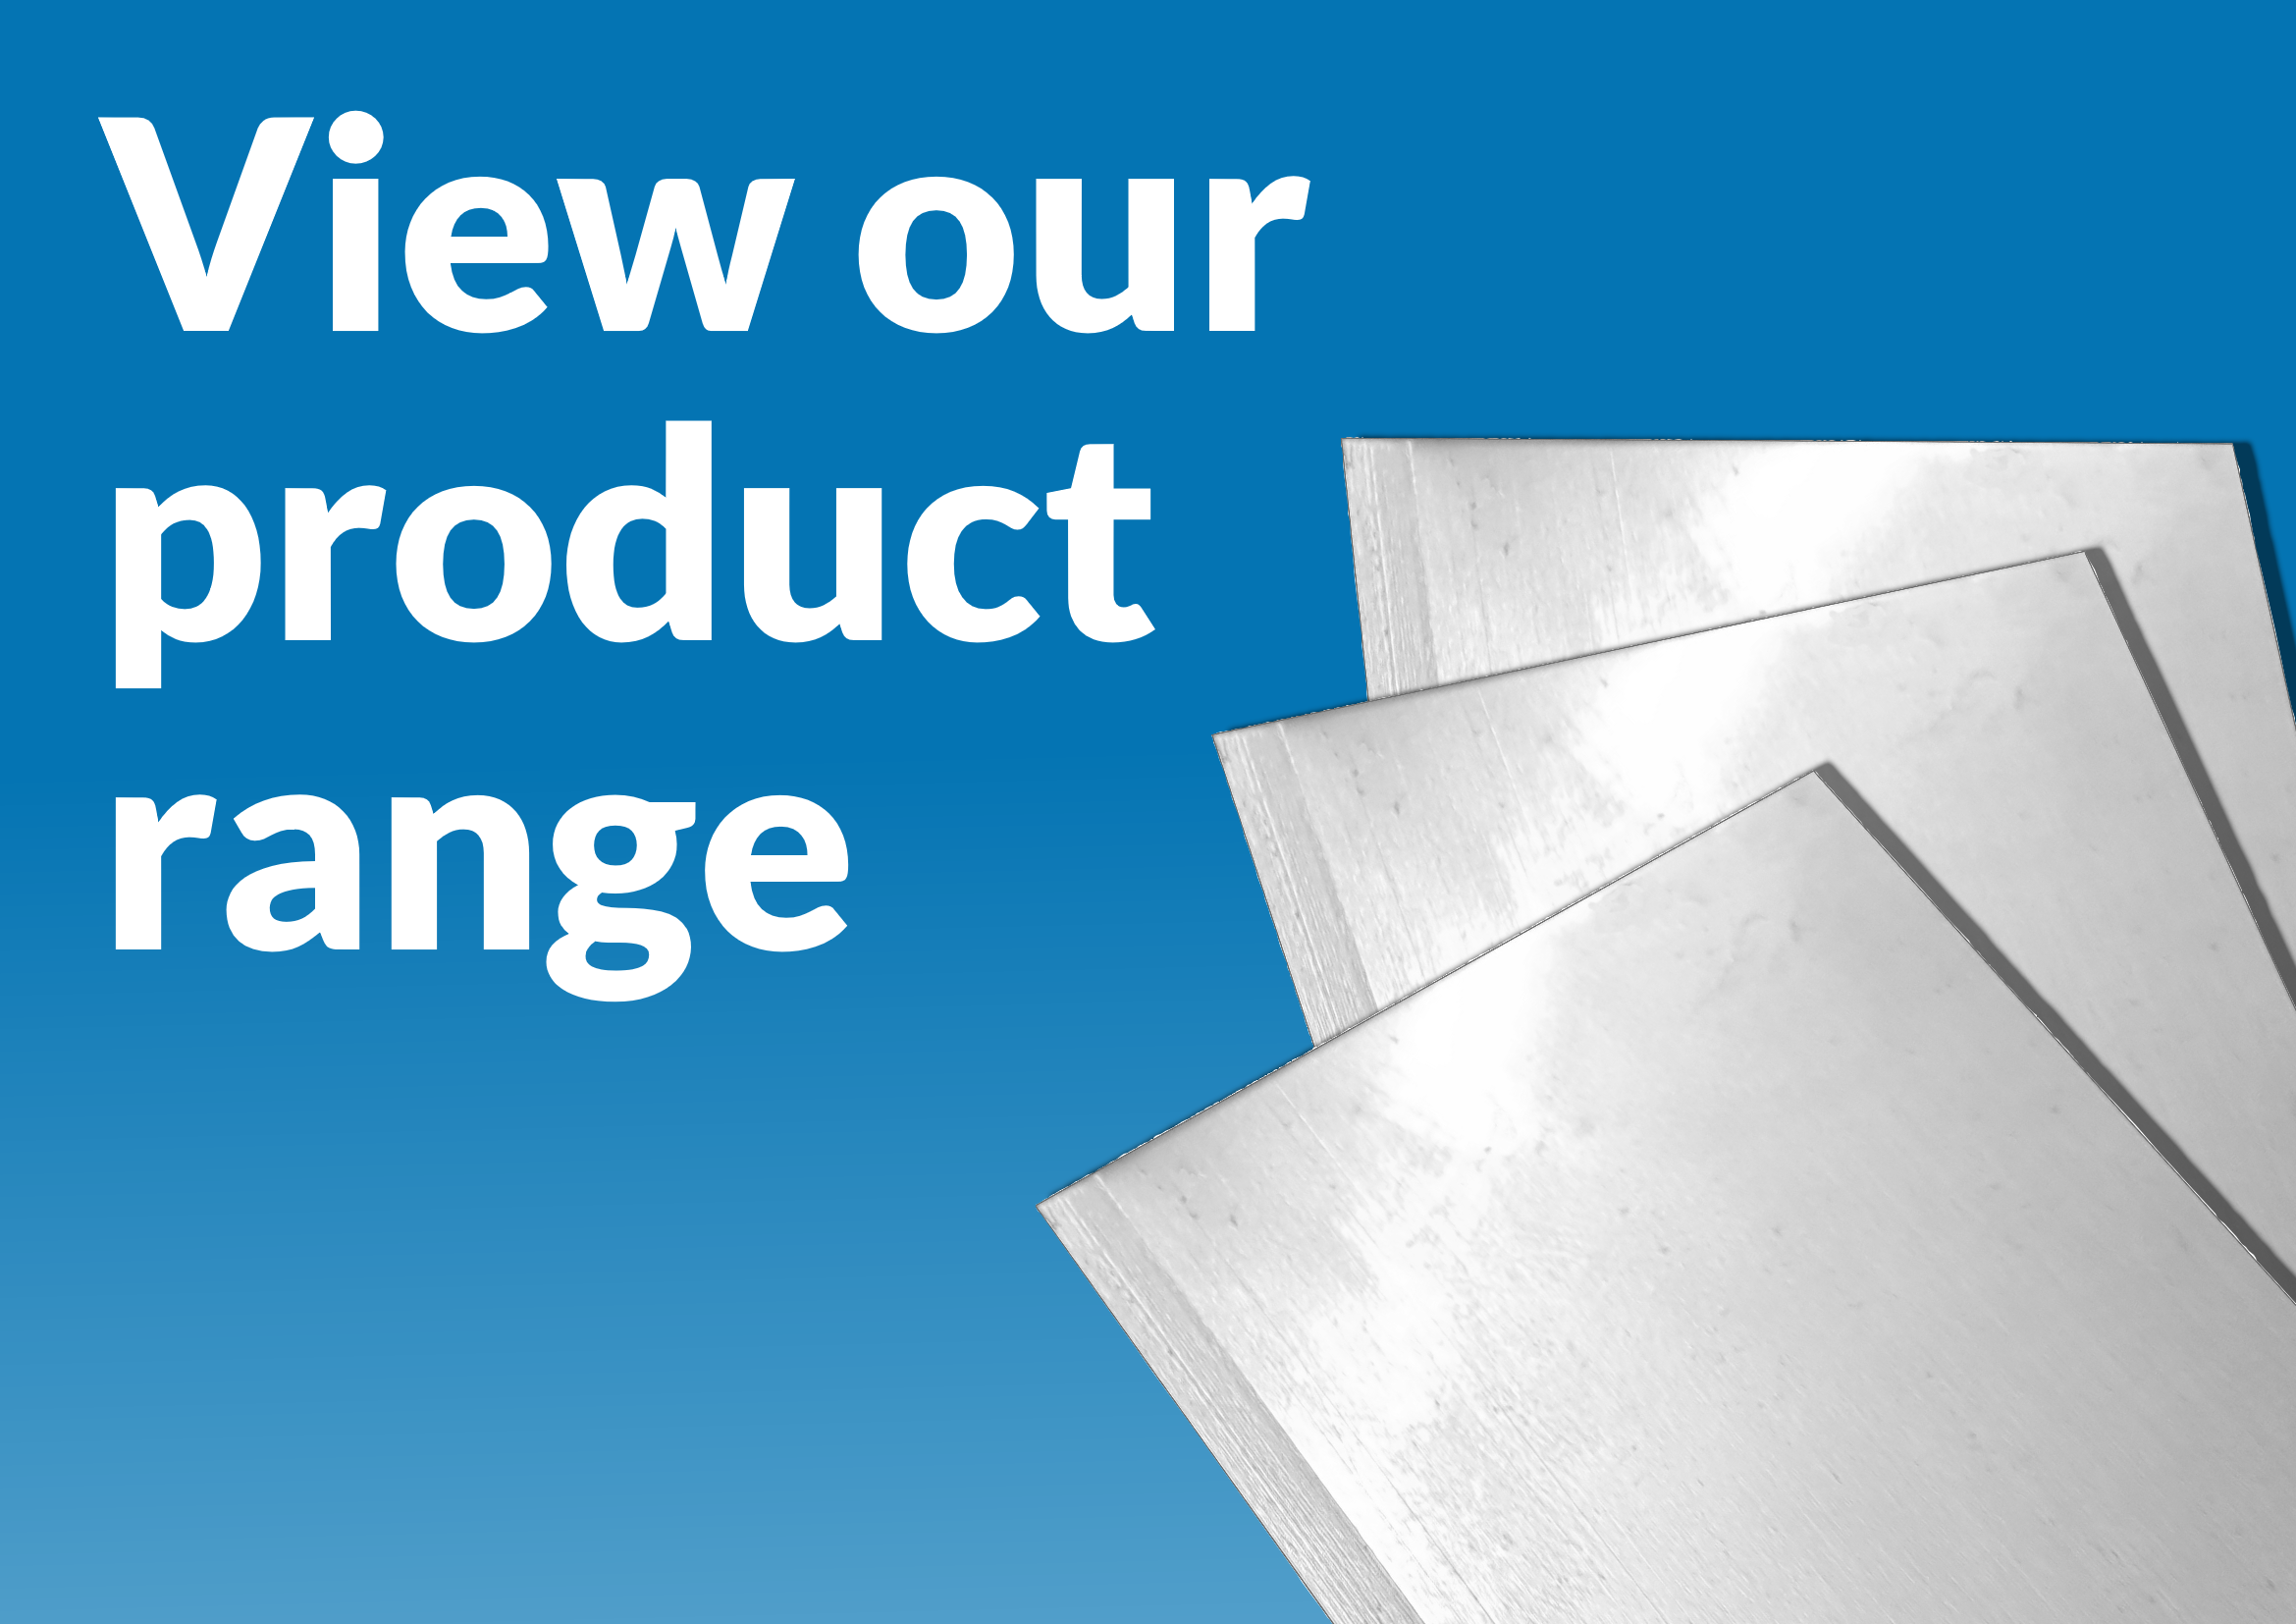 PrintBlade - UK Manufactured Doctor Blades in a range of materials and edge profiles